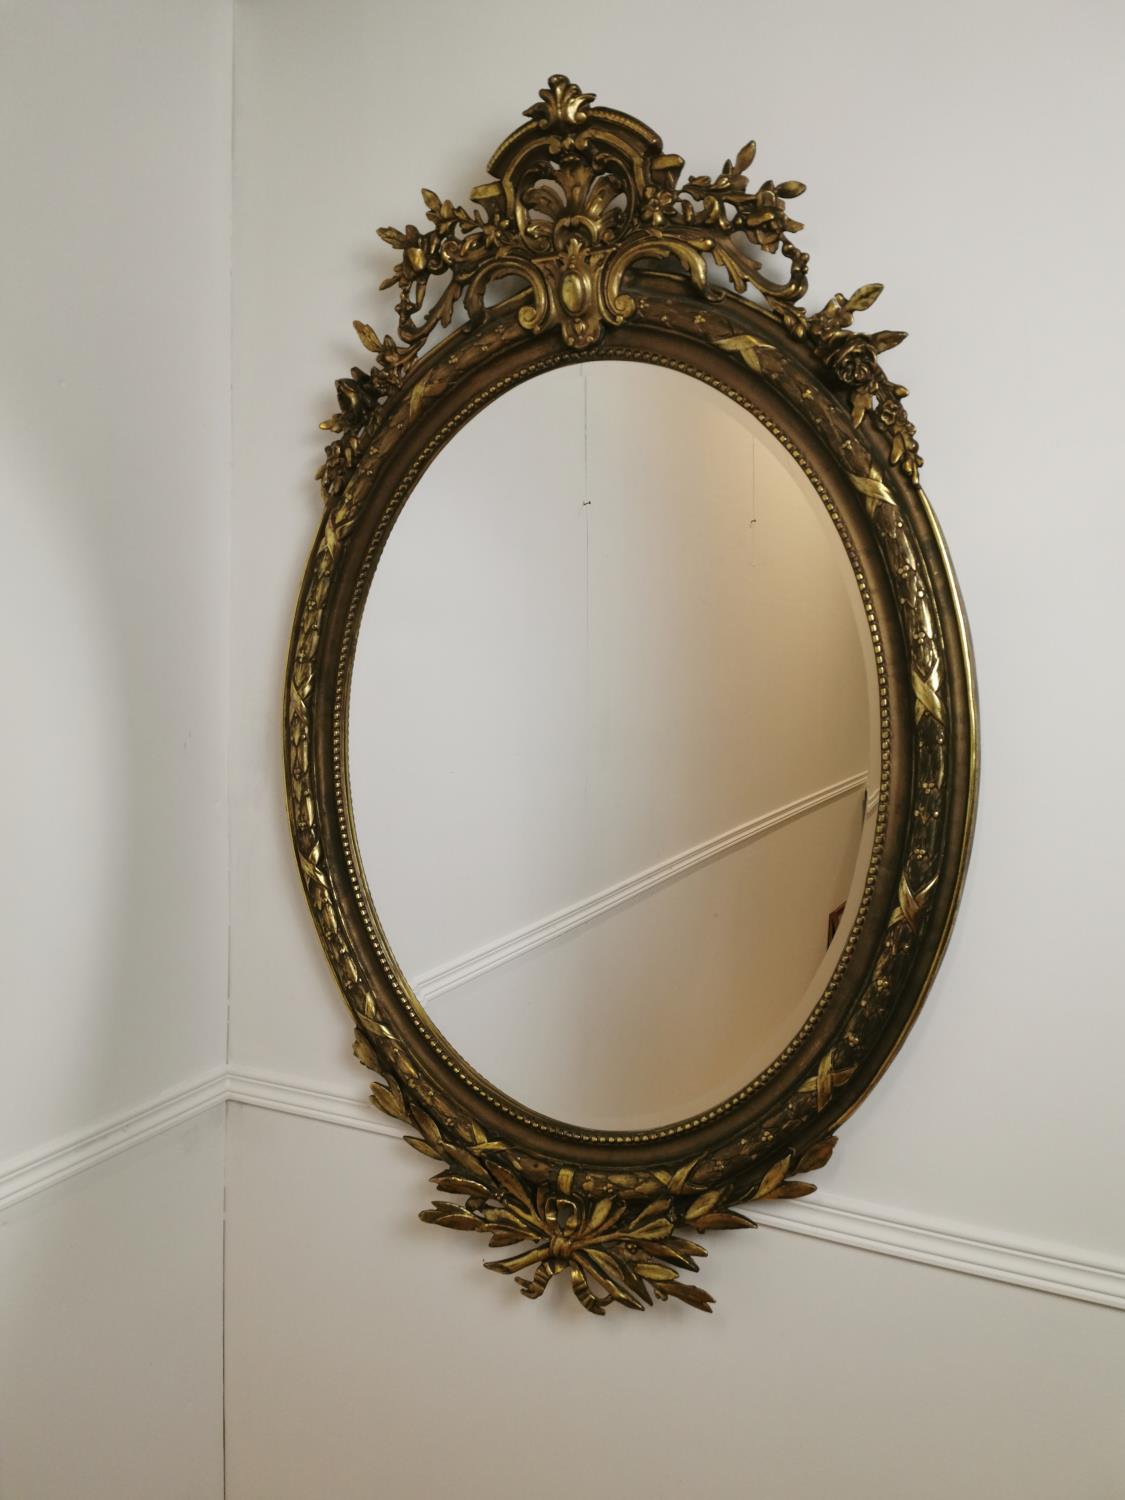 Good quality giltwood and gesso wall mirror - Image 5 of 5